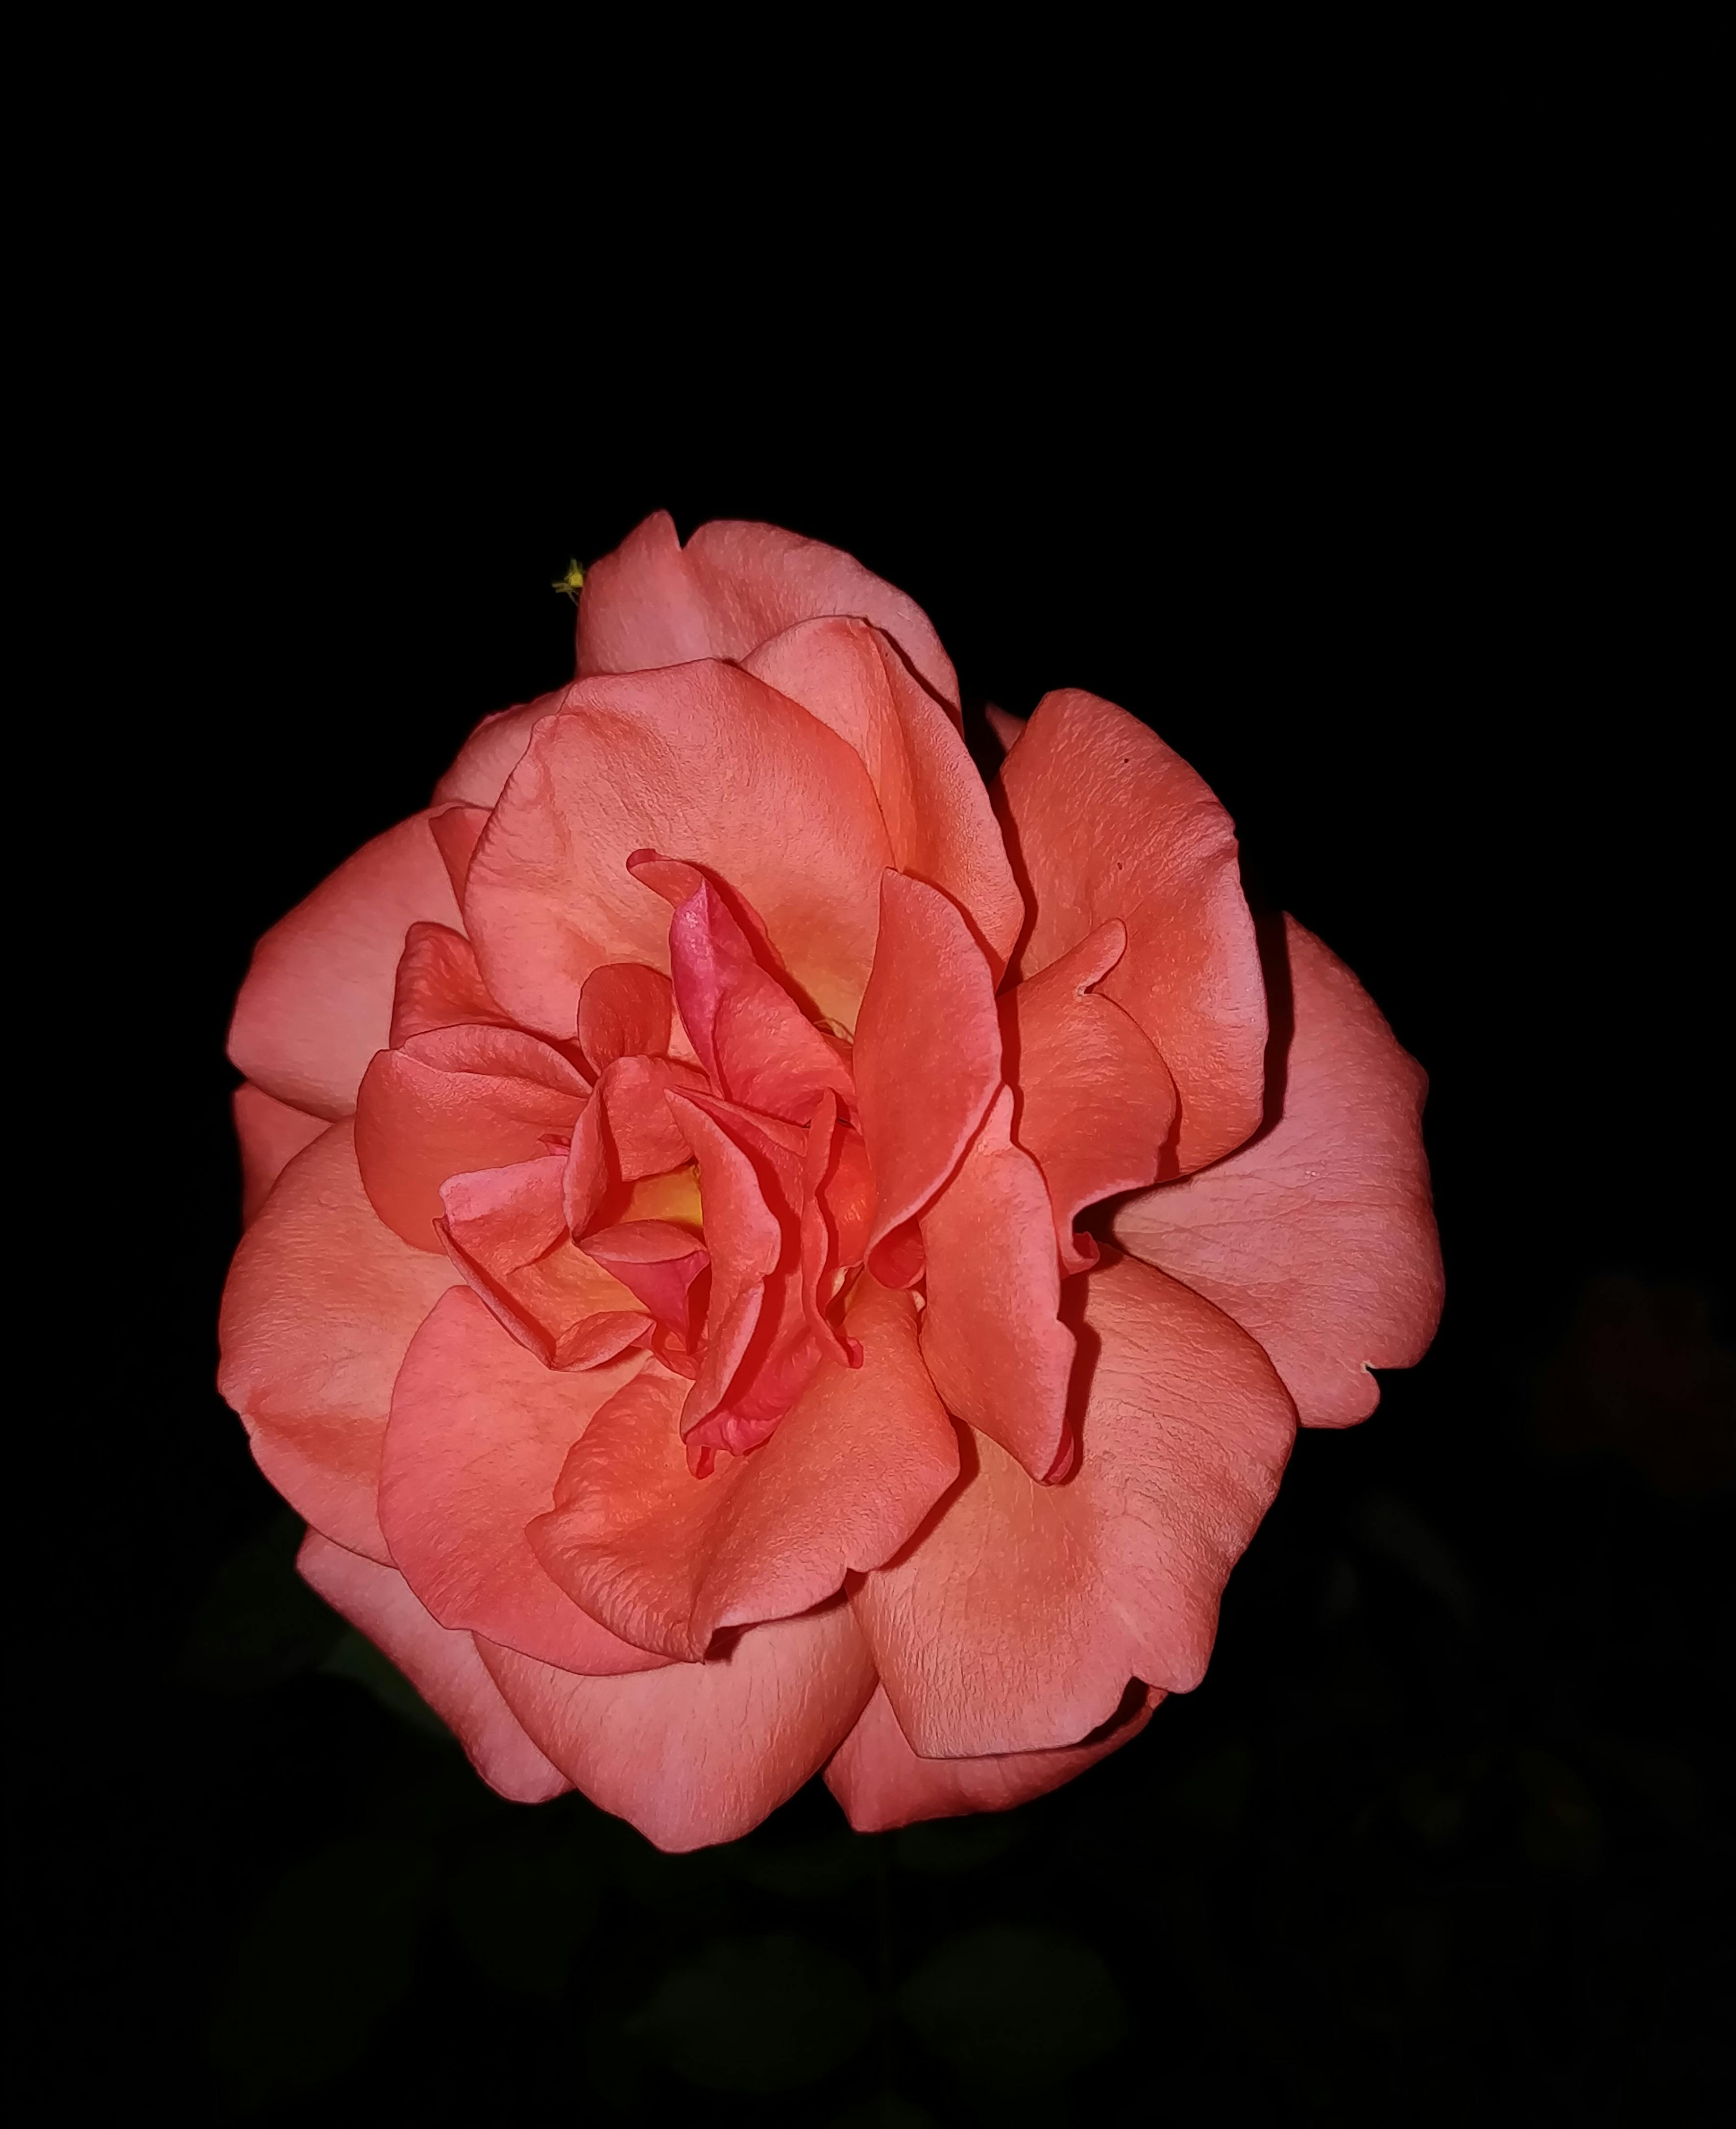 Free stock photo of Oneplus5T, Photography at night, Pink Rose